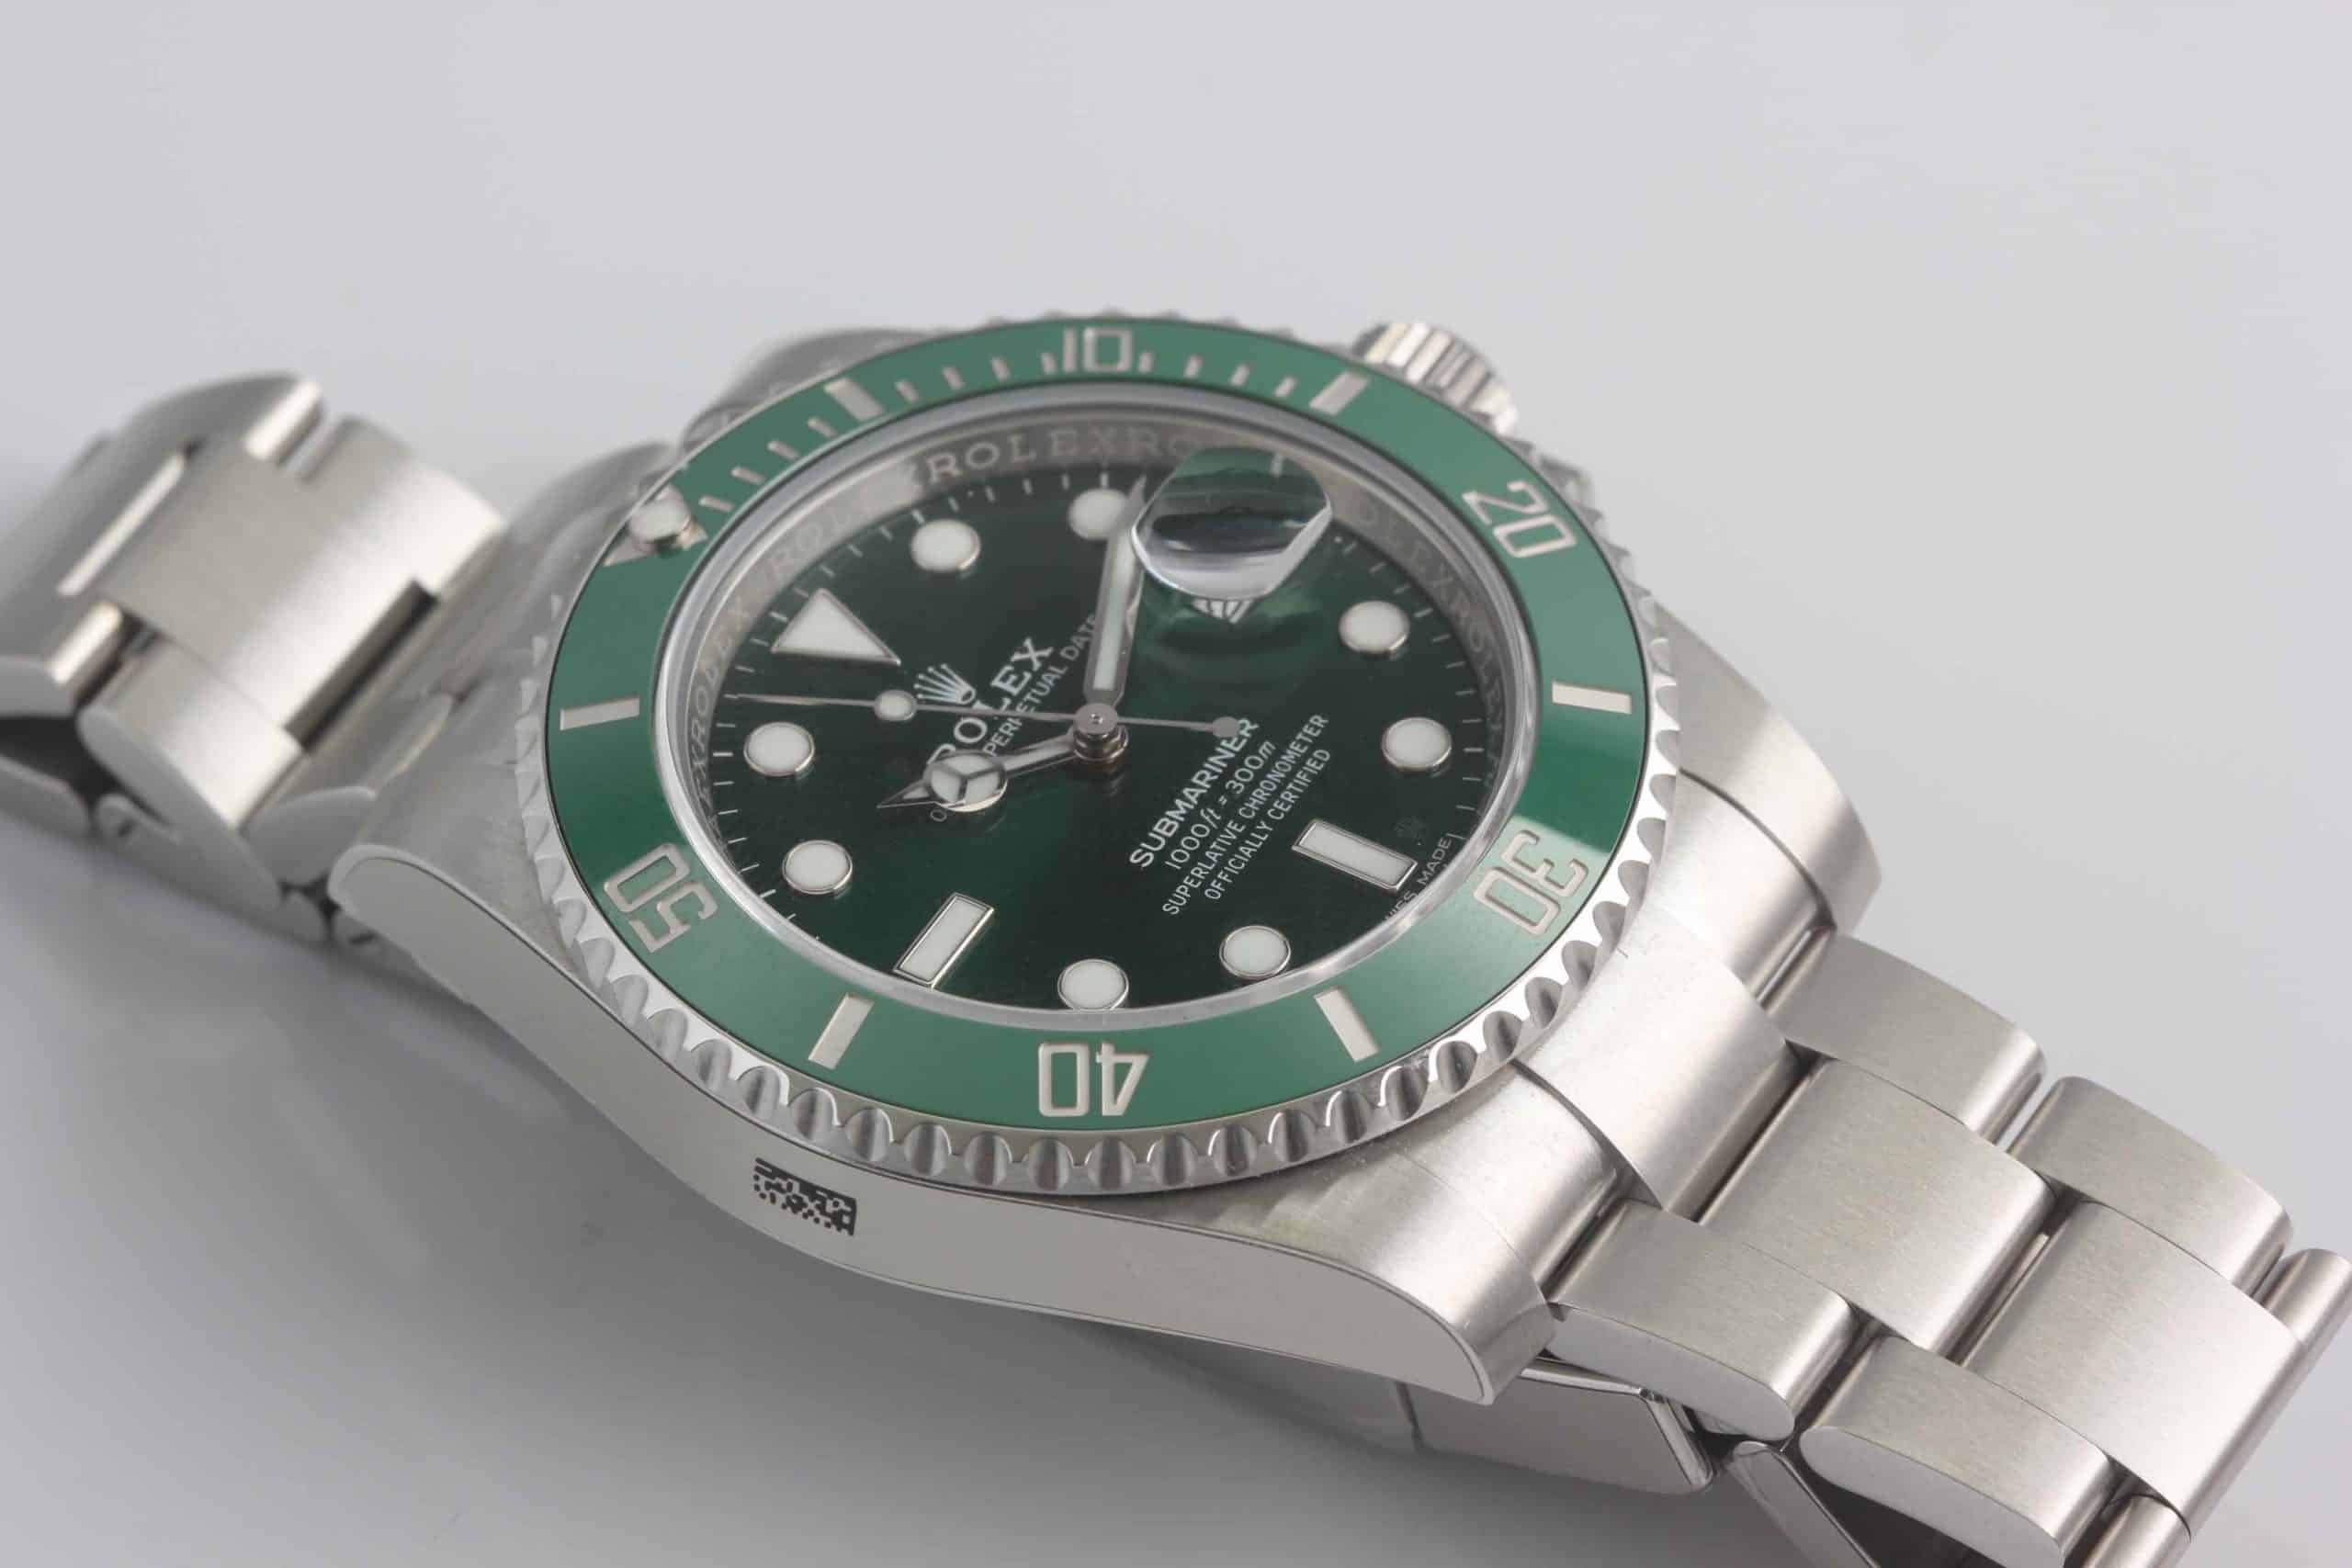 Submariner "HULK" Reference NEW!! - SOLD - Watch Seller